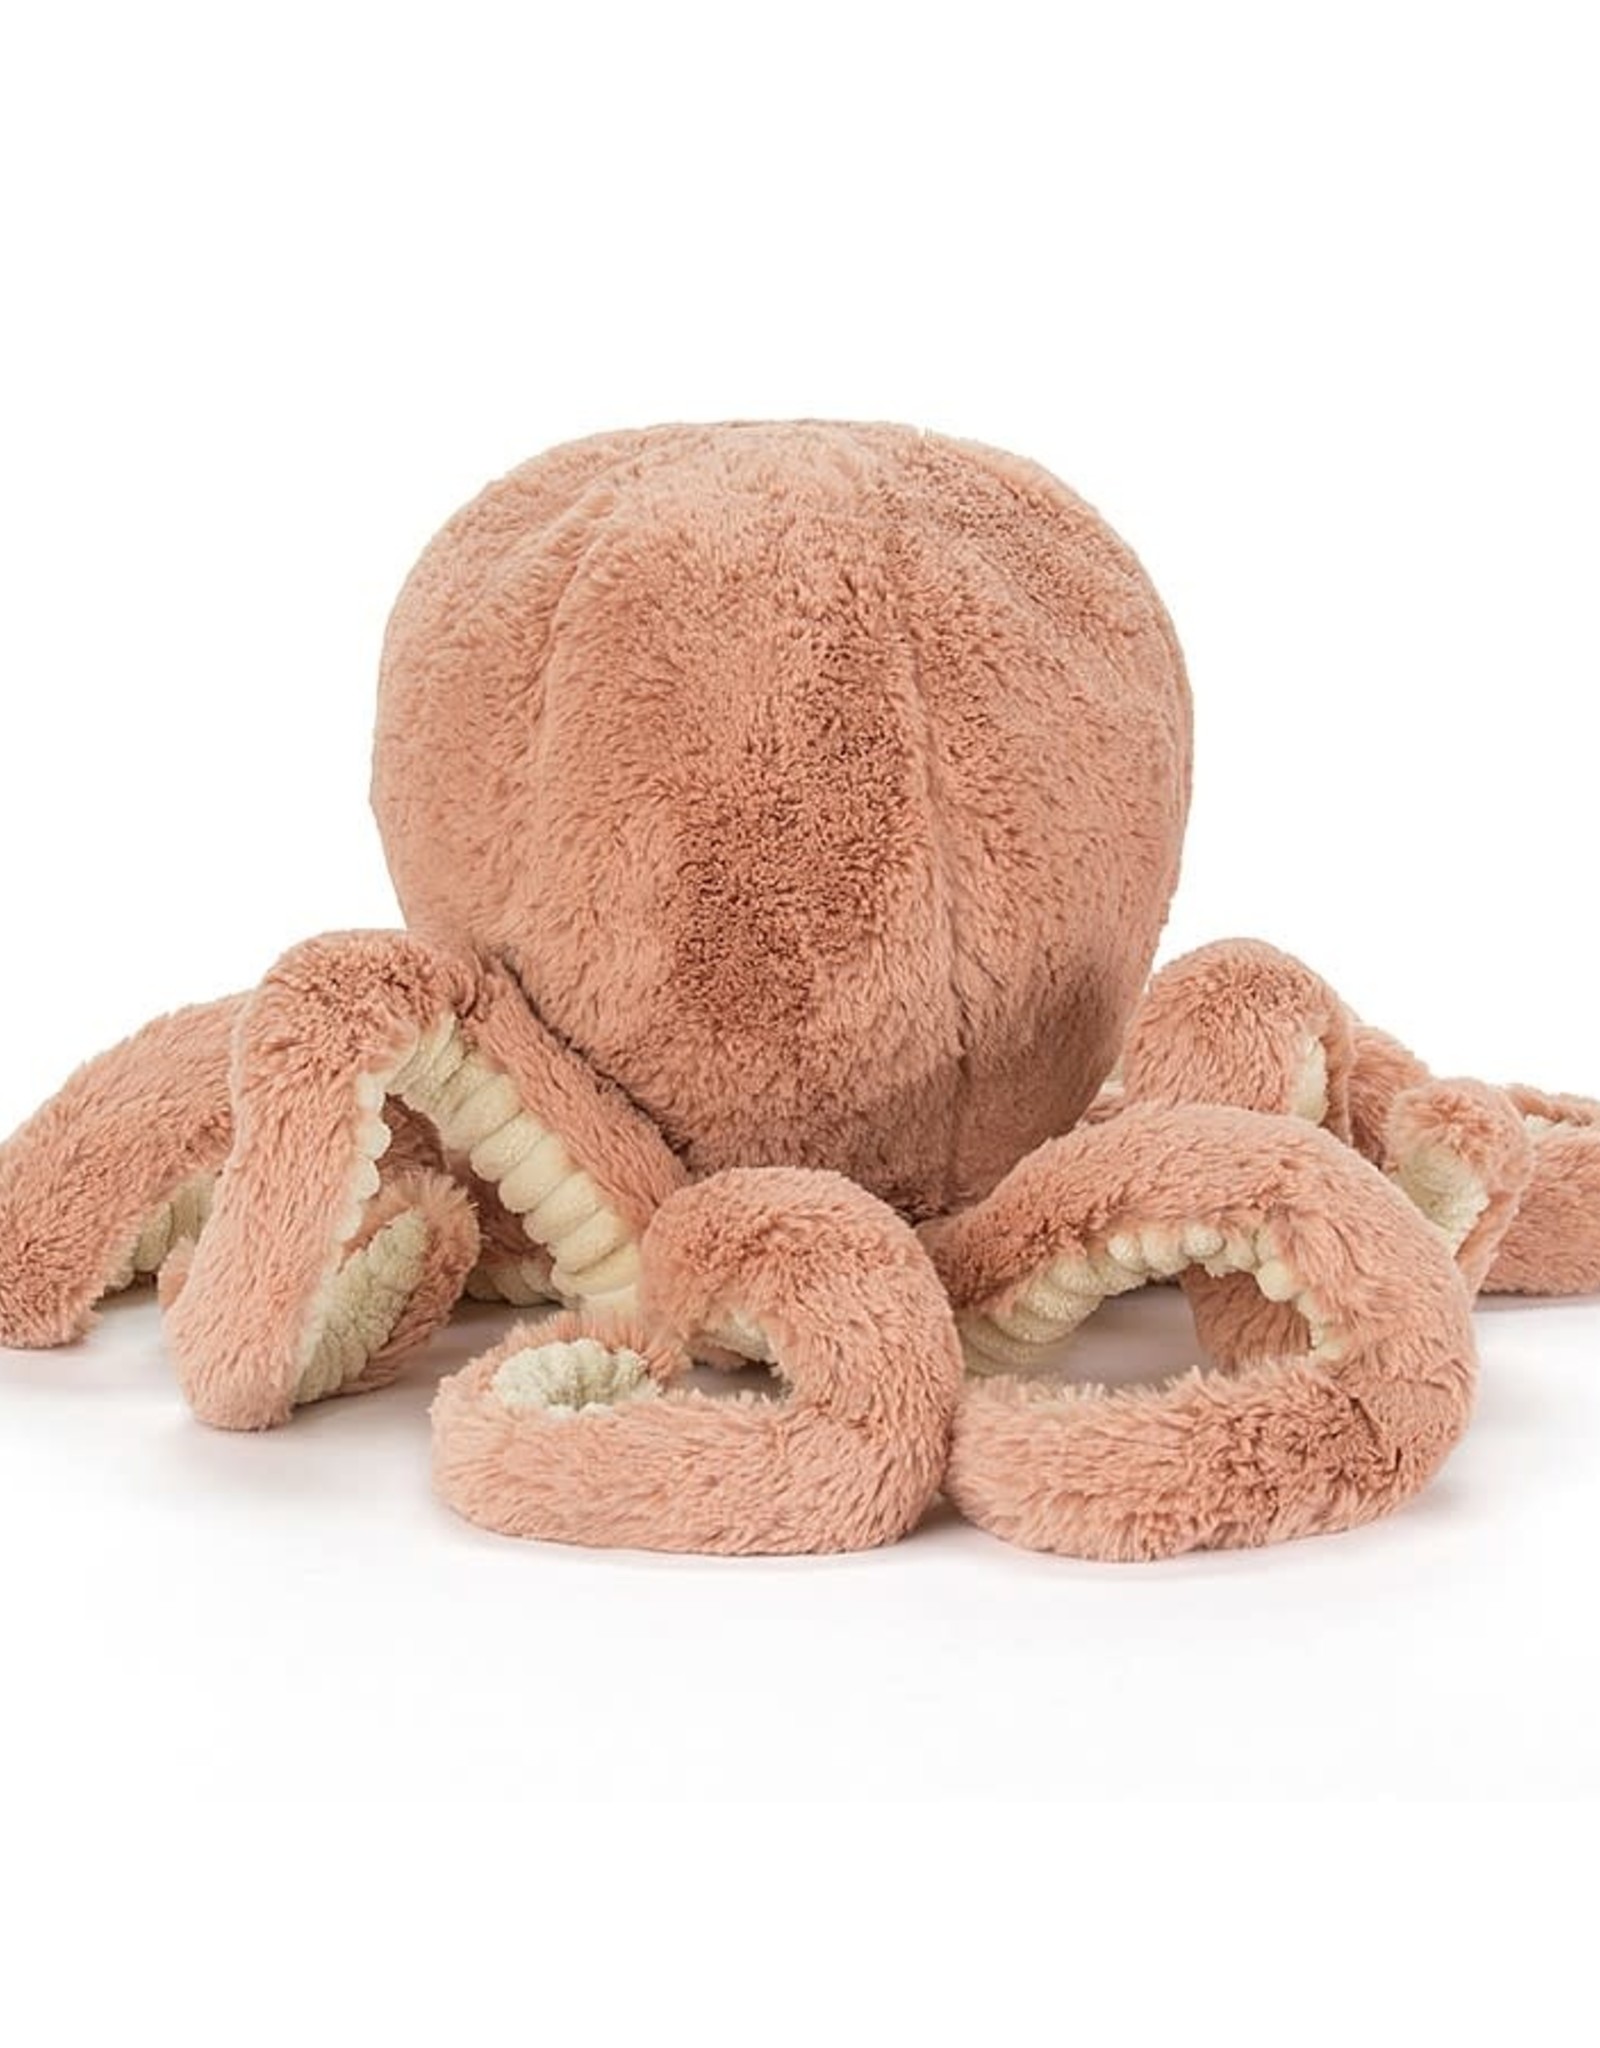 Jellycat Odell Octopus: Large 19"